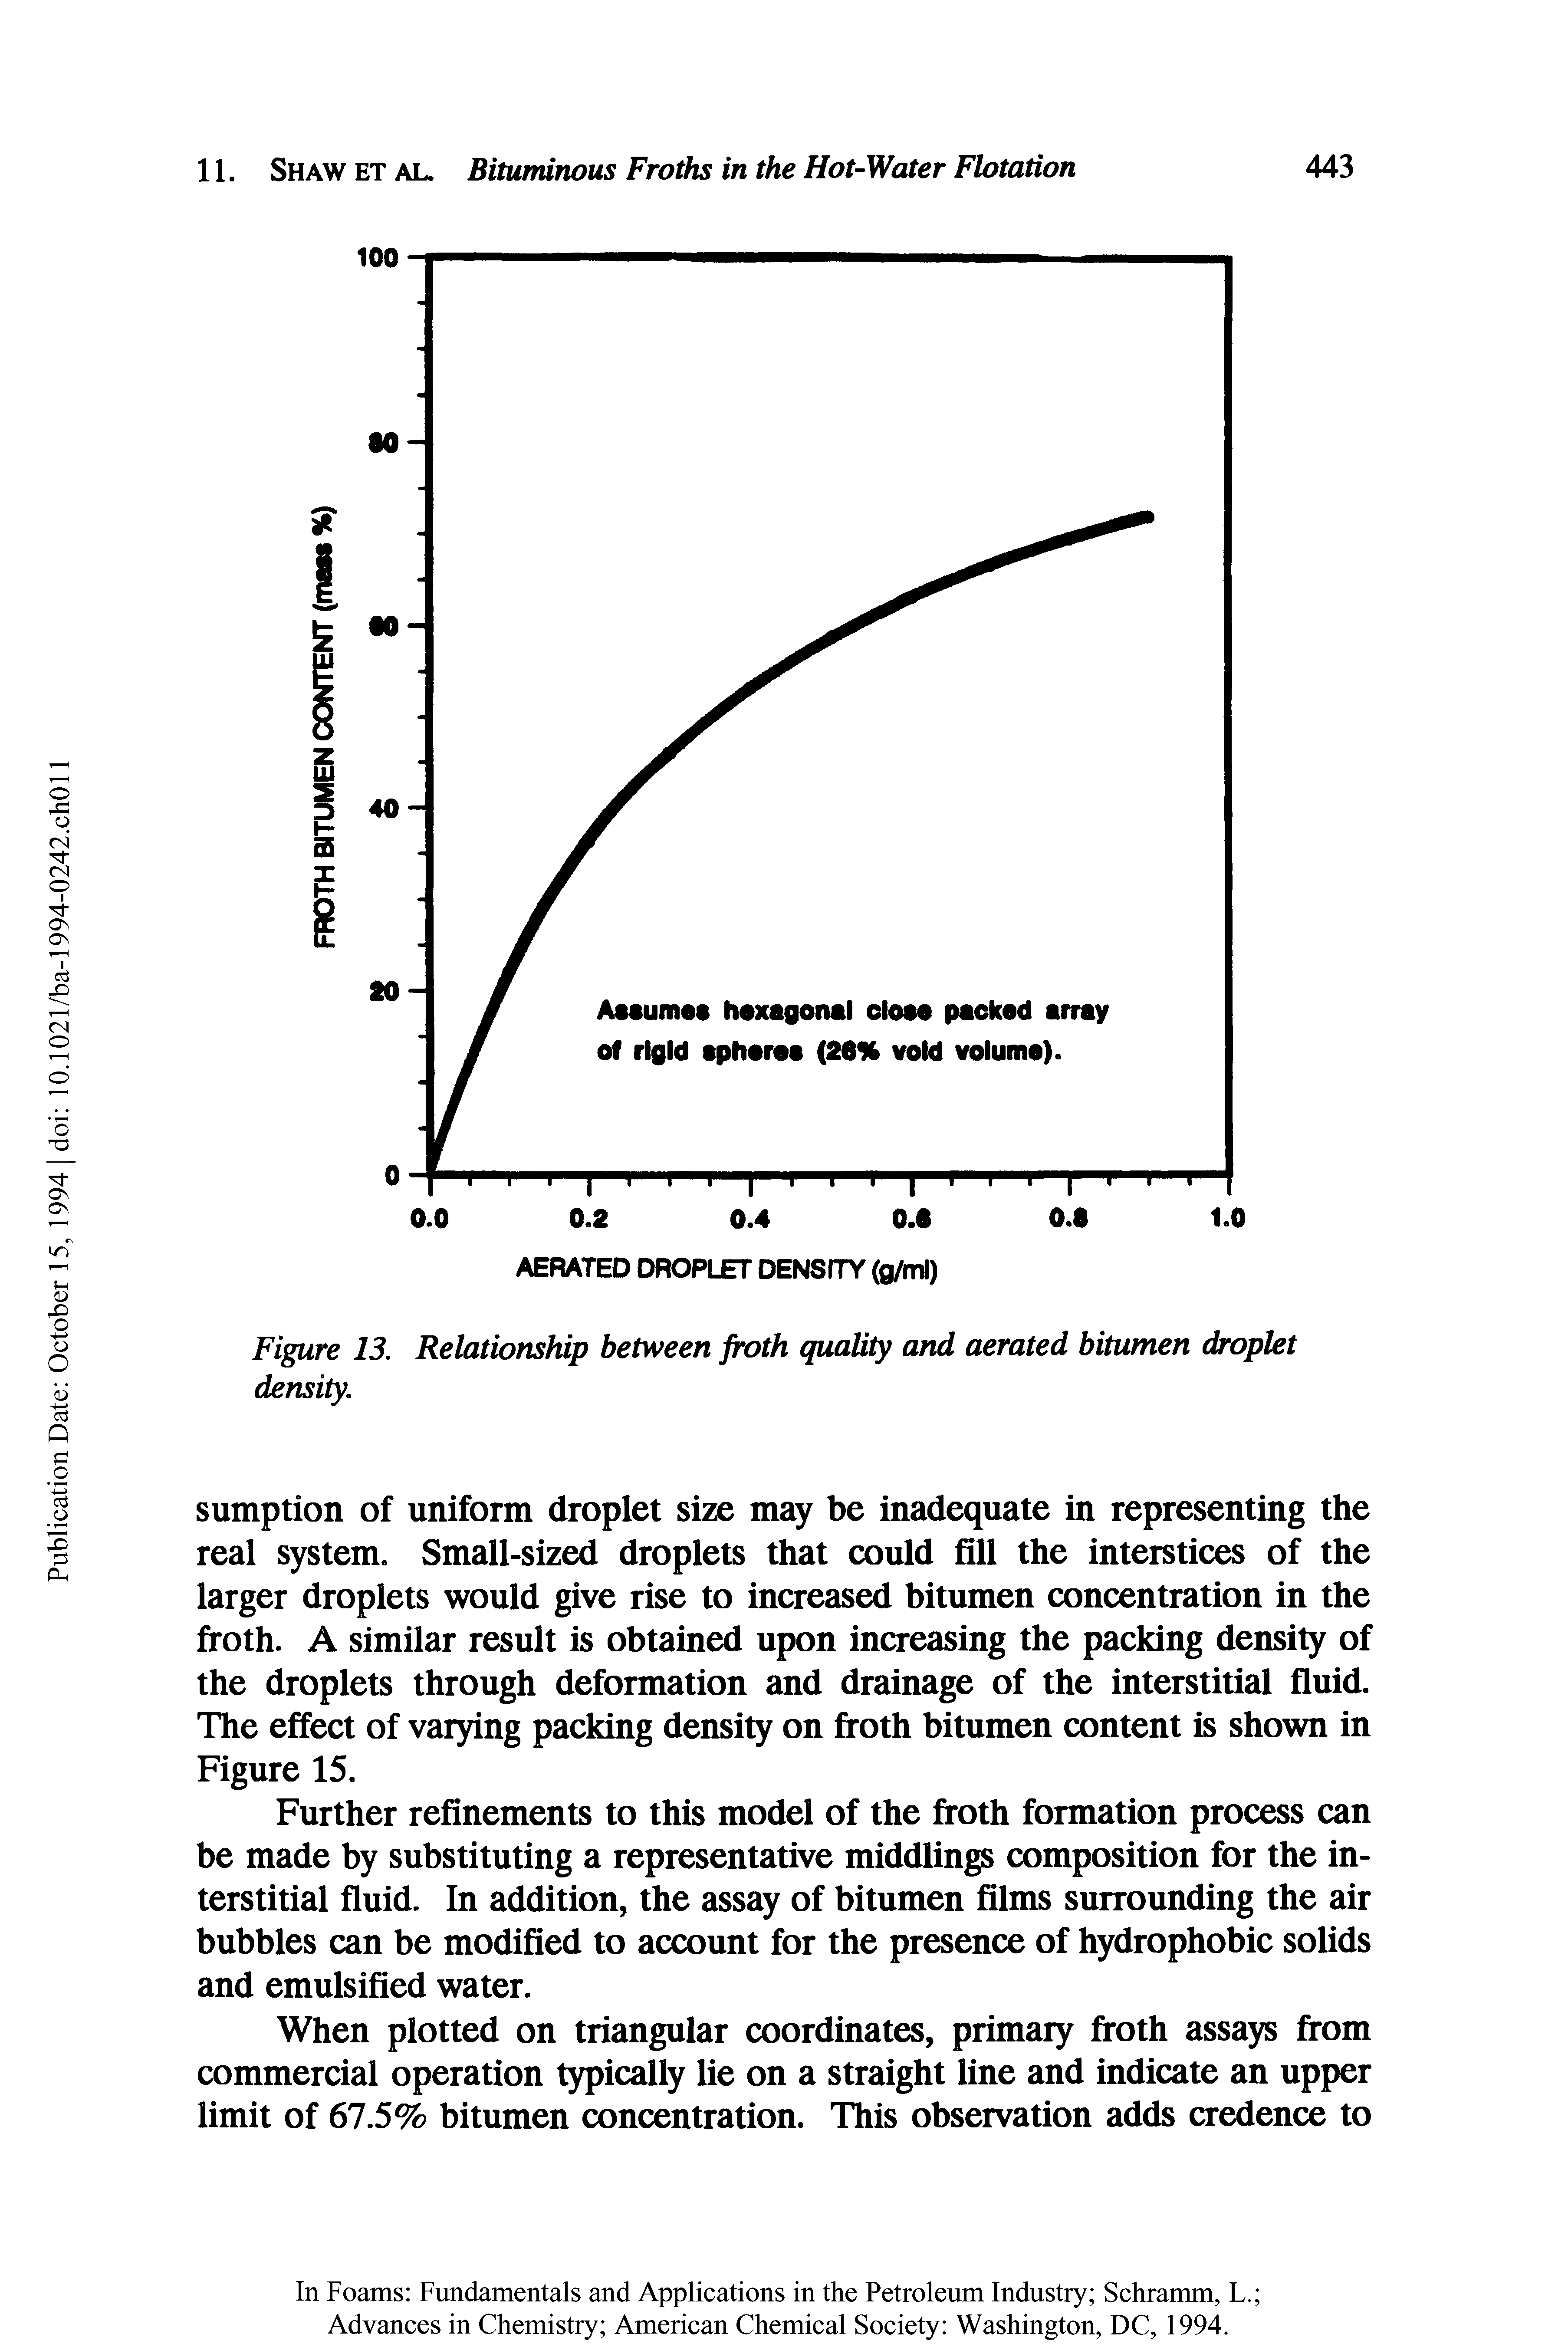 Figure 13. Relationship between froth quality and aerated bitumen droplet density.